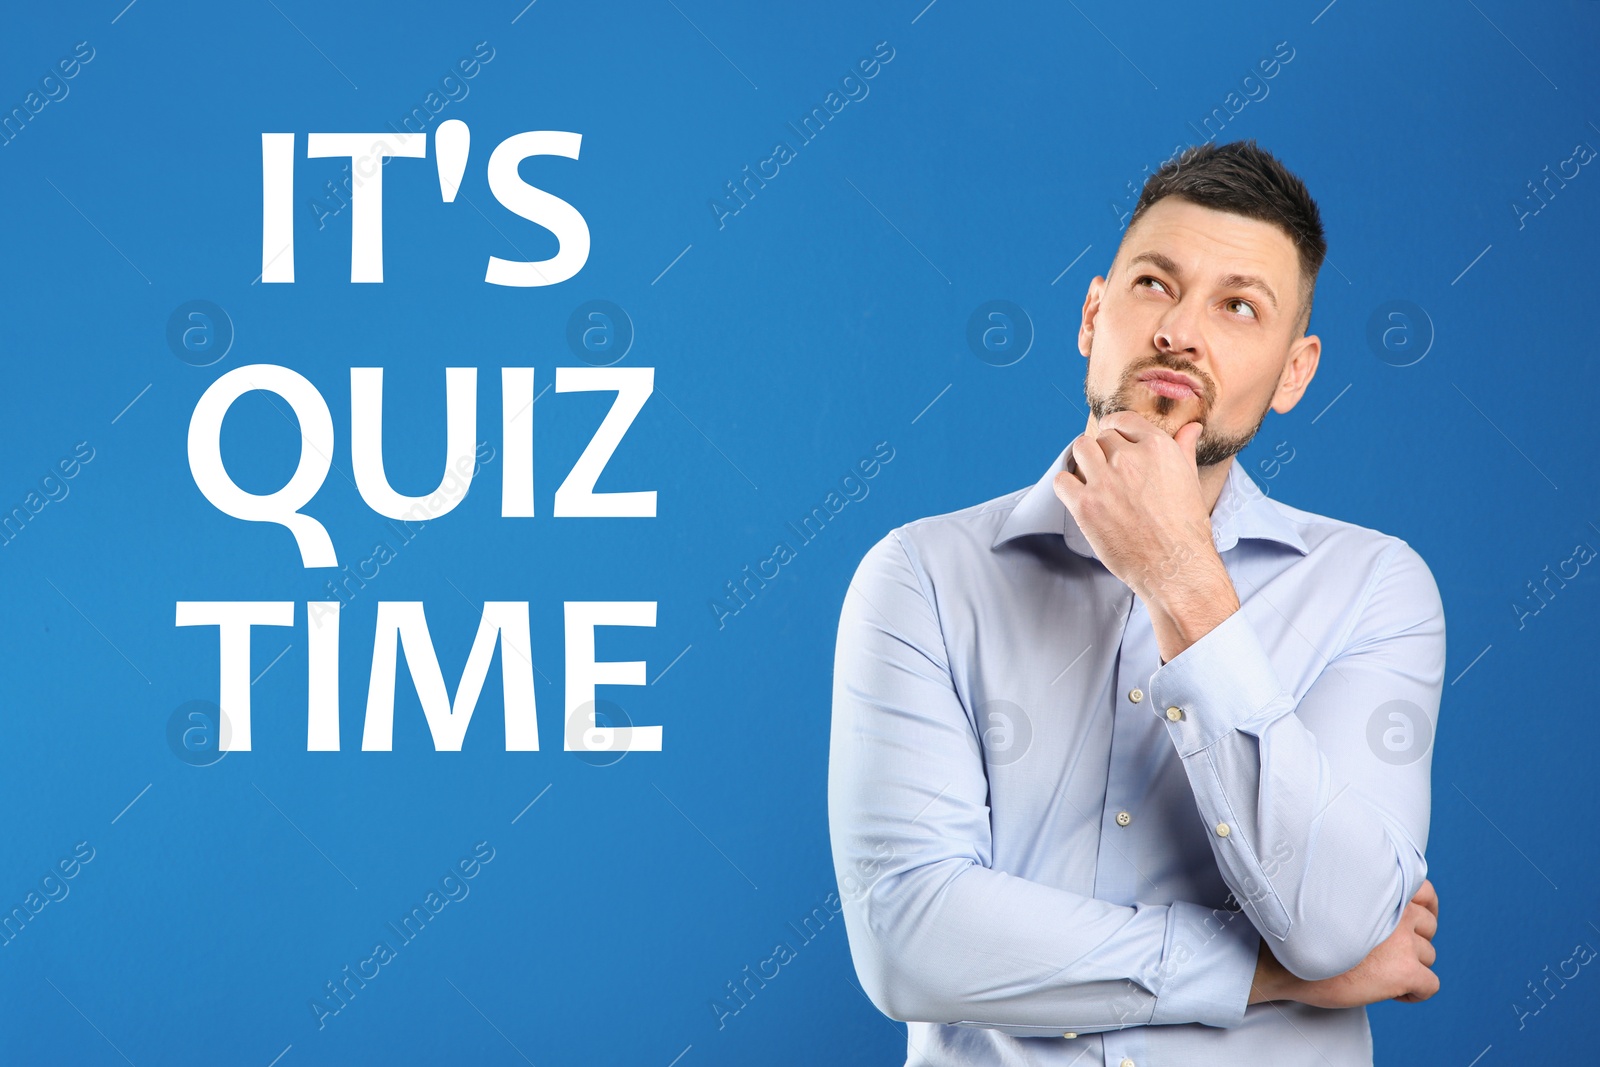 Image of Thoughtful man and phrase IT'S QUIZ TIME on blue background 